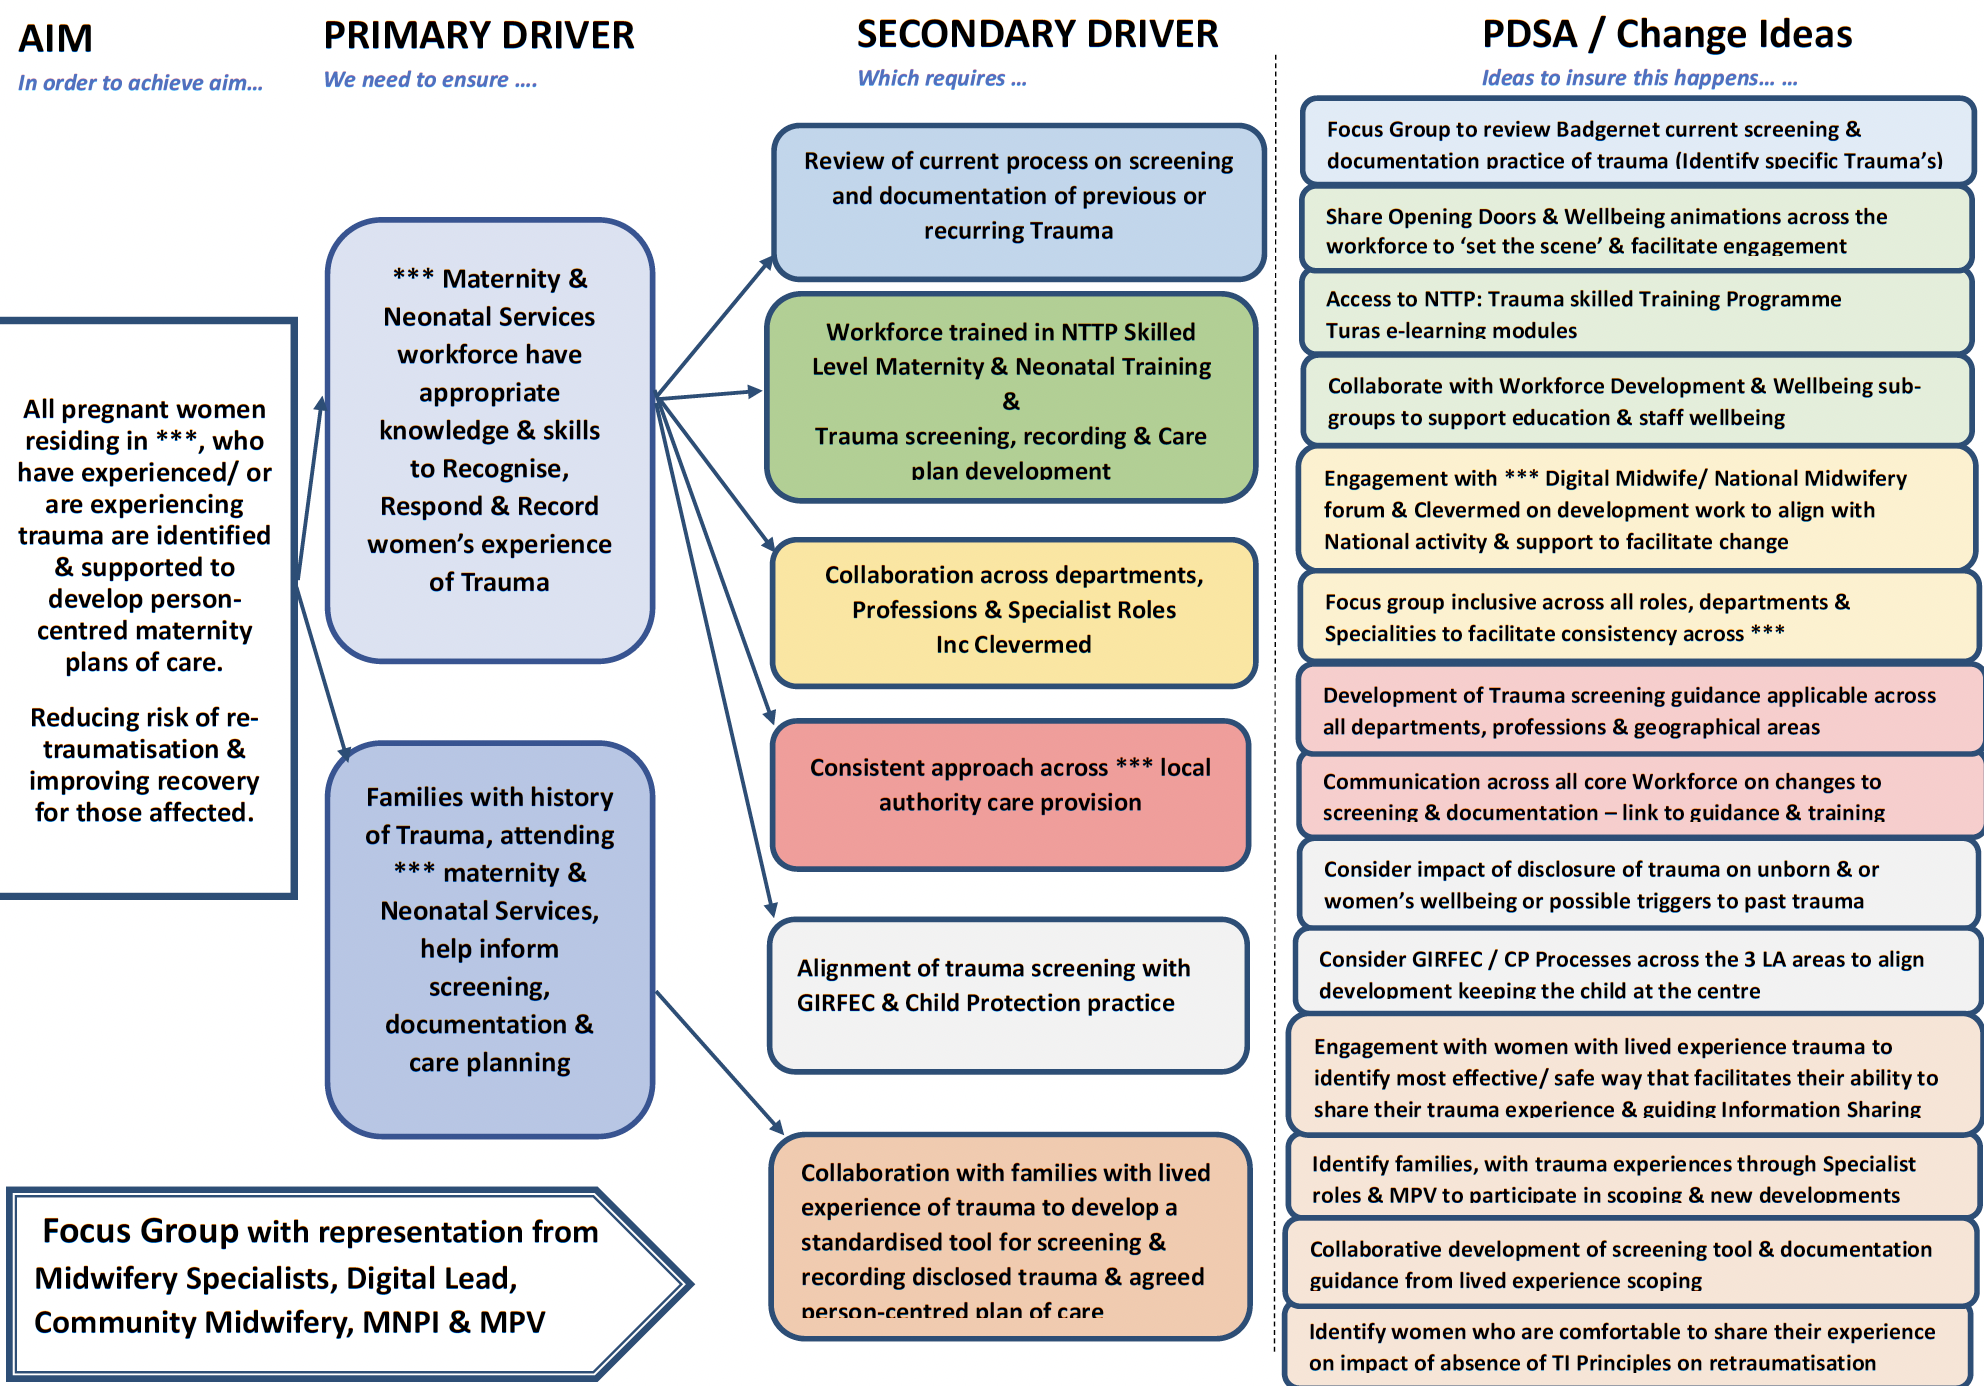 This diagram sets out how the ways in which person-centred, collaborative screening, documentation and care planning (where the power is shared with those with lived experience and relationship-based) can improve service users’ recovery from trauma and reduce the risk of re-traumatisation. The diagram sets out the steps that need to be taken (including primary and secondary and a number of key change ideas) to achieve this overarching aim. It highlights a range of proactive measures such as carrying out a review of the current process on screening and documentation of previous or recurring trauma.